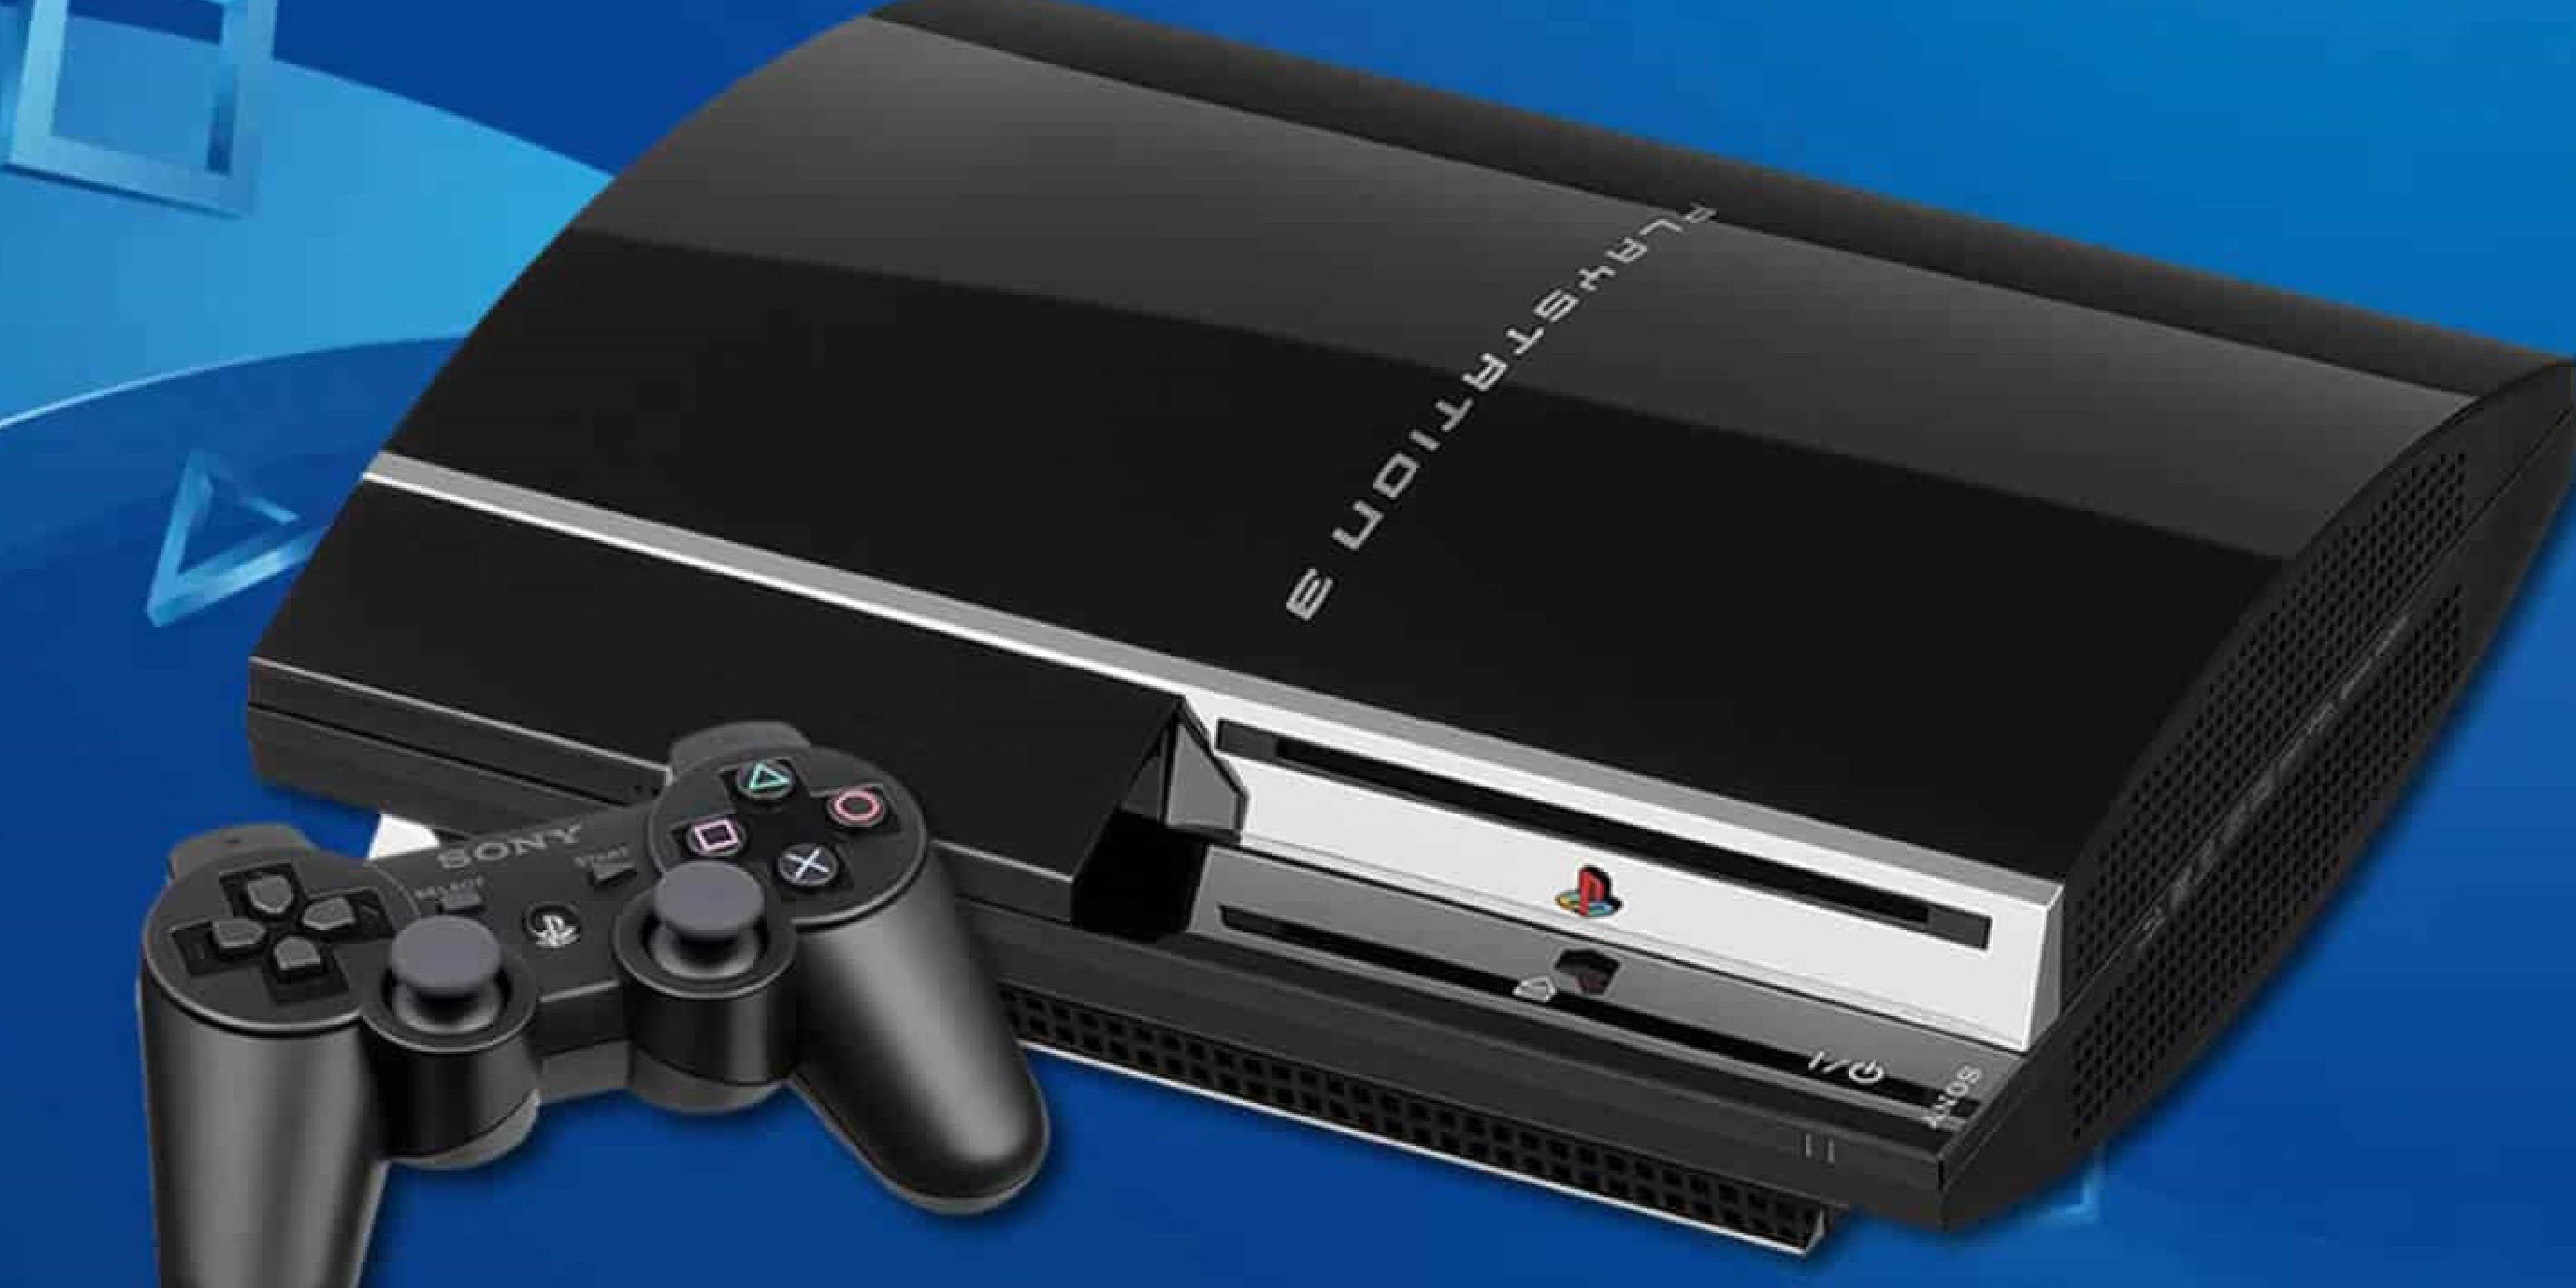 Sony PlayStation 3 Console and controller